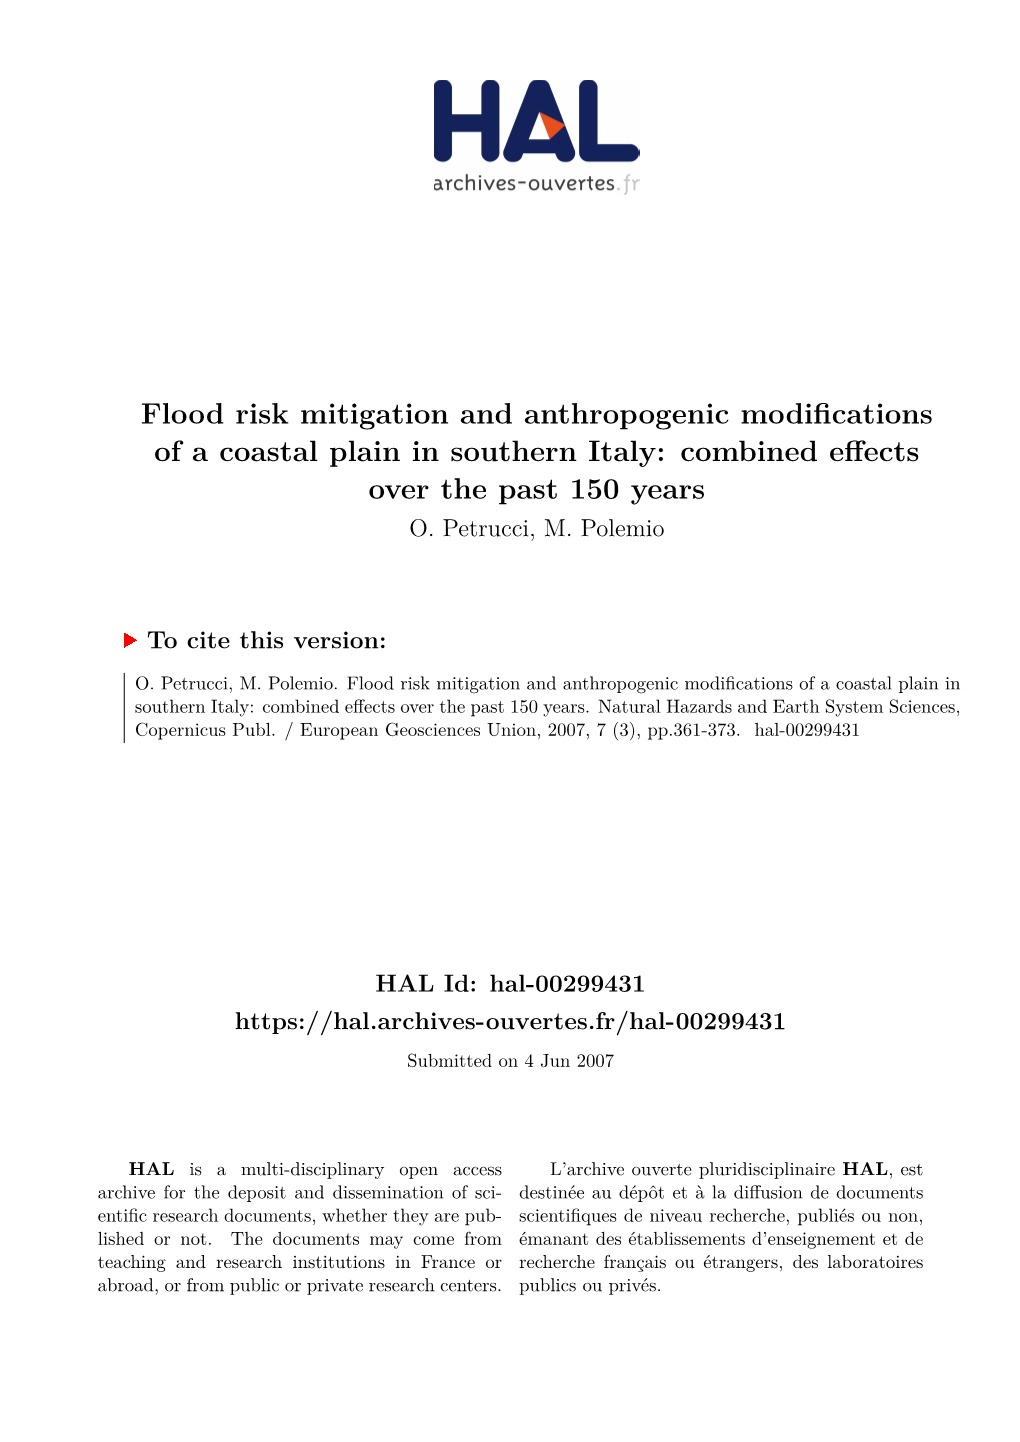 Flood Risk Mitigation and Anthropogenic Modifications of a Coastal Plain in Southern Italy: Combined Effects Over the Past 150 Years O